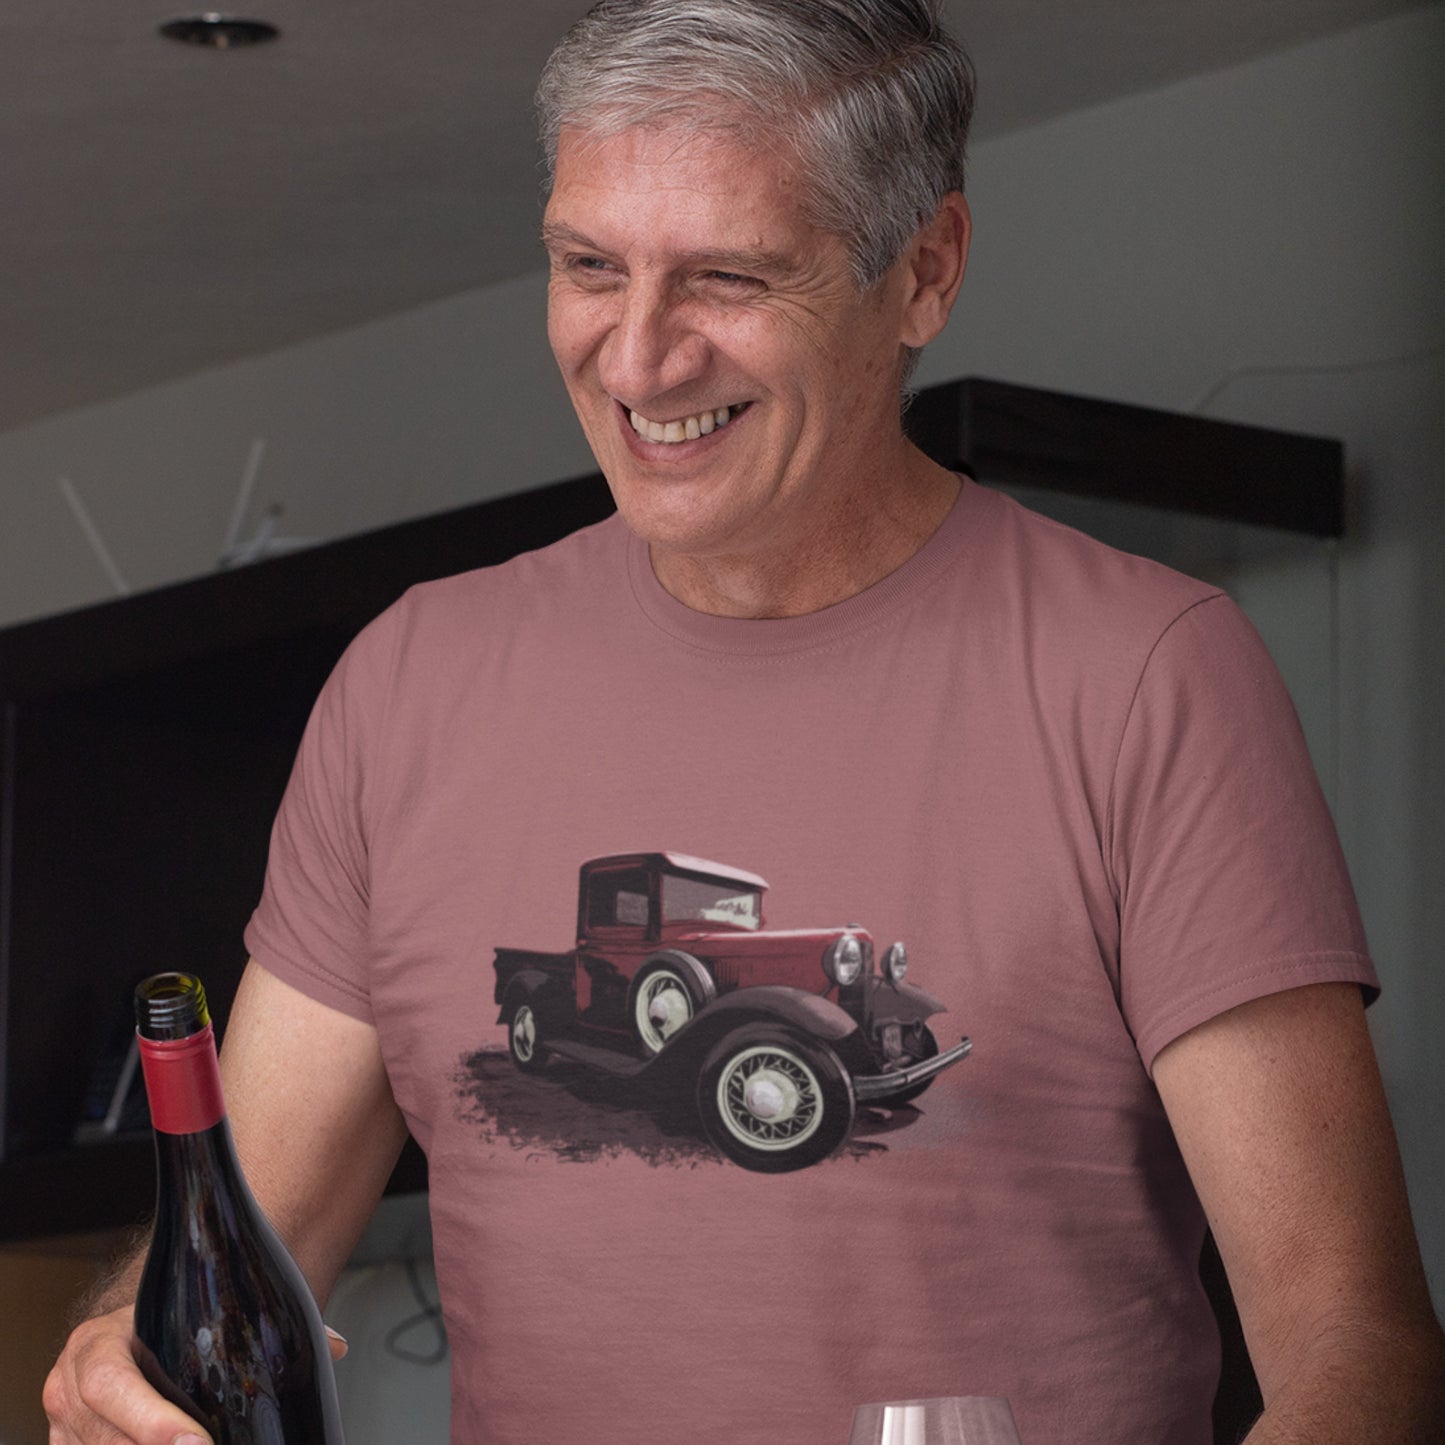 Classic Truck Shirt featuring a red Ford Model A truck